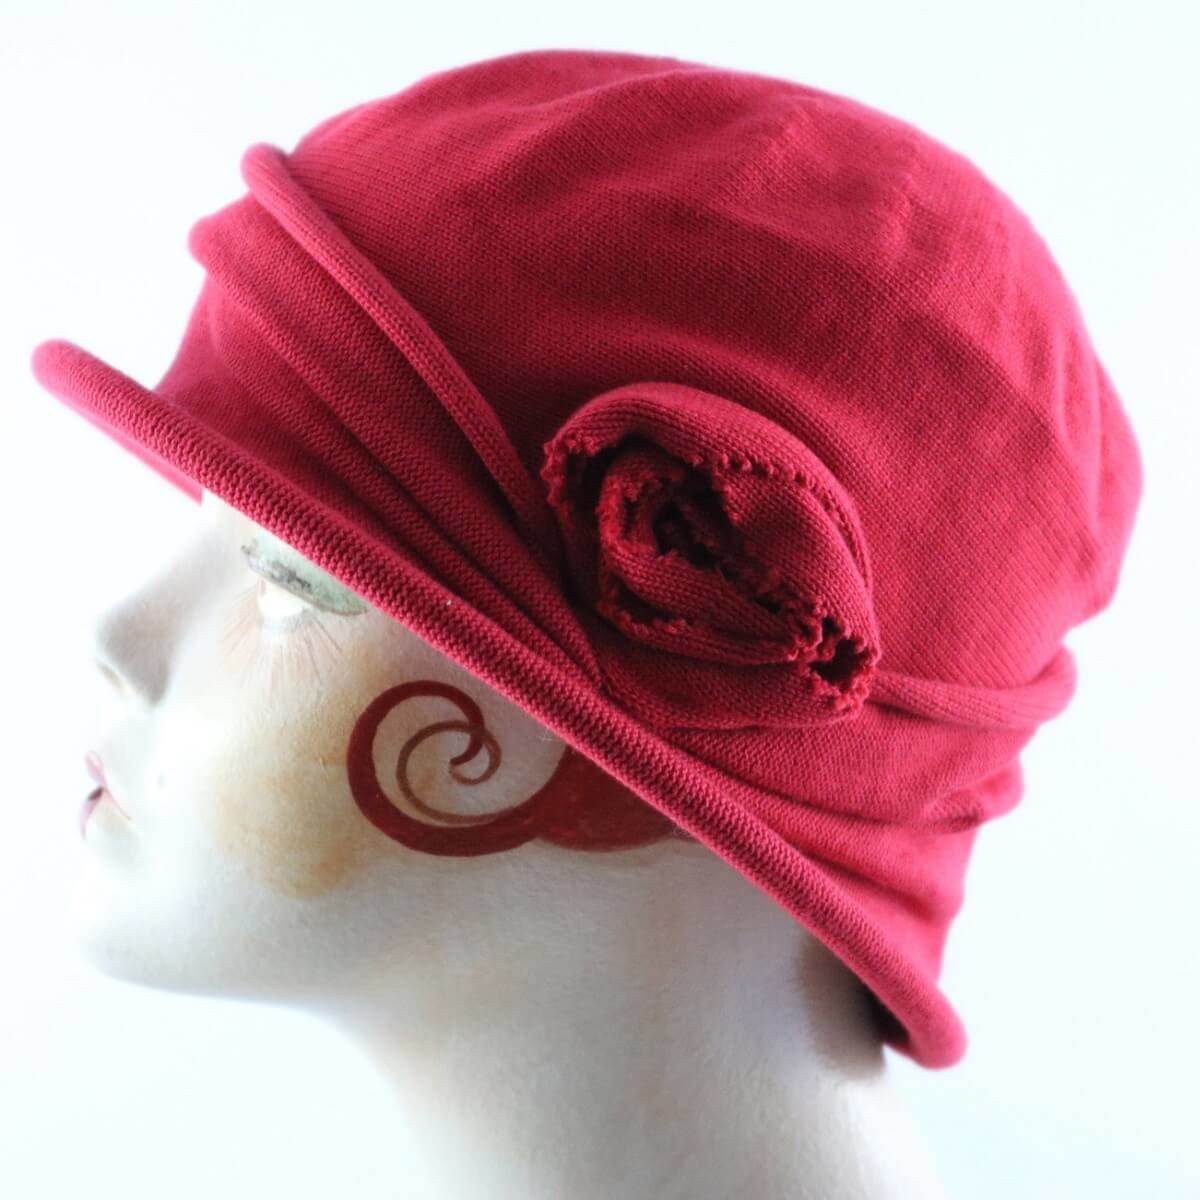 Ladies Summer Hats for a Classically Glamorous Finish